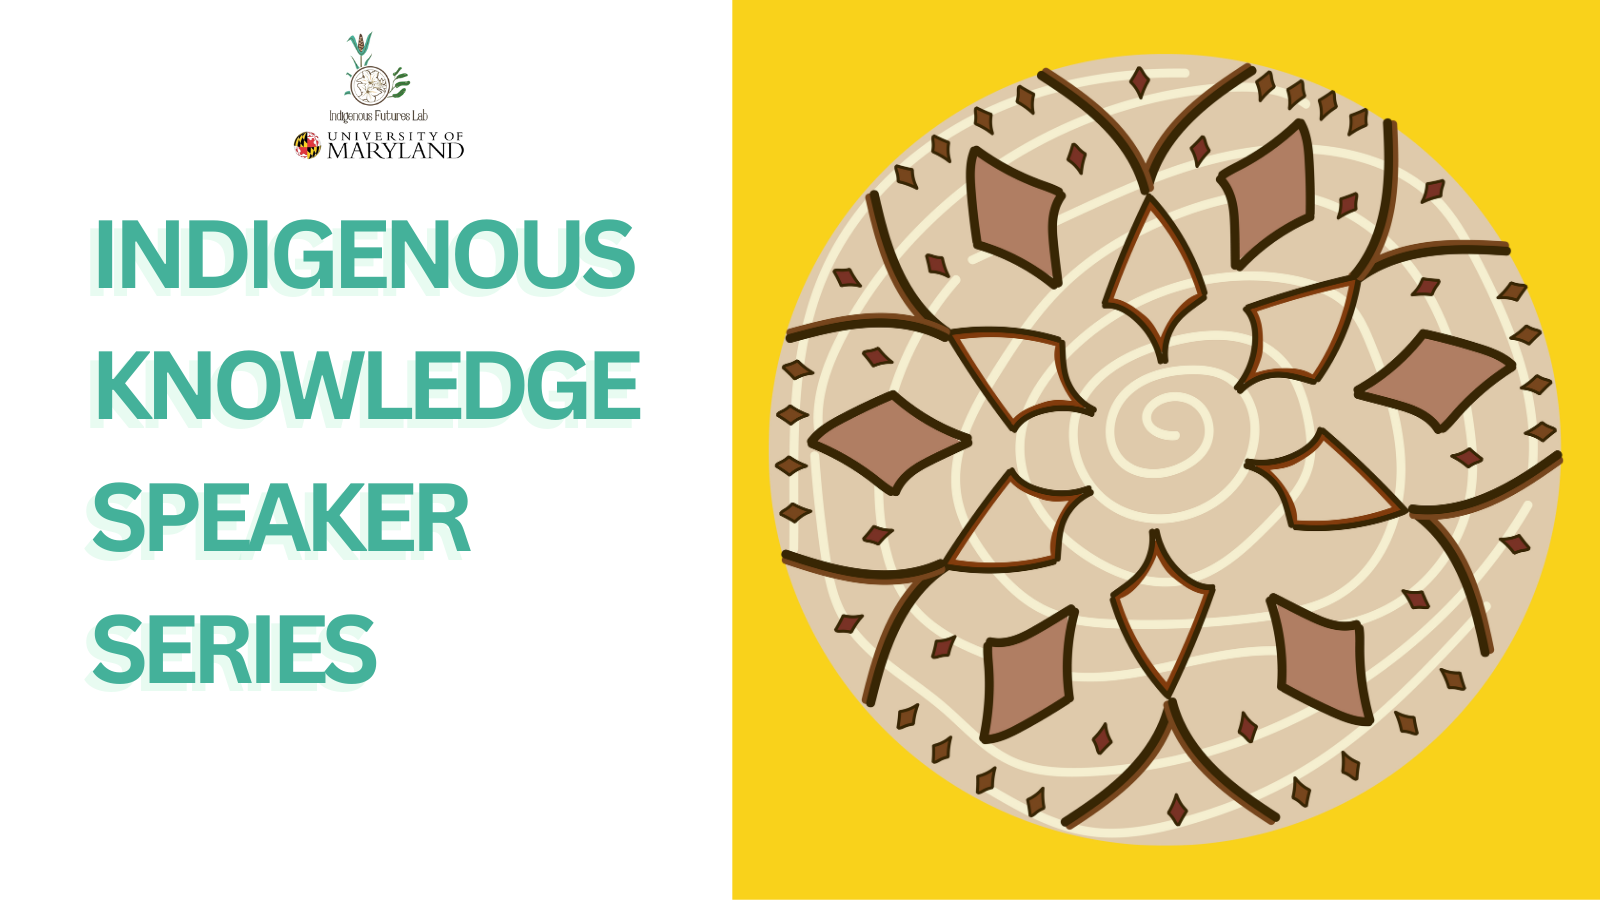 Decorative Image for the Indigenous Knowledge Speaker Series